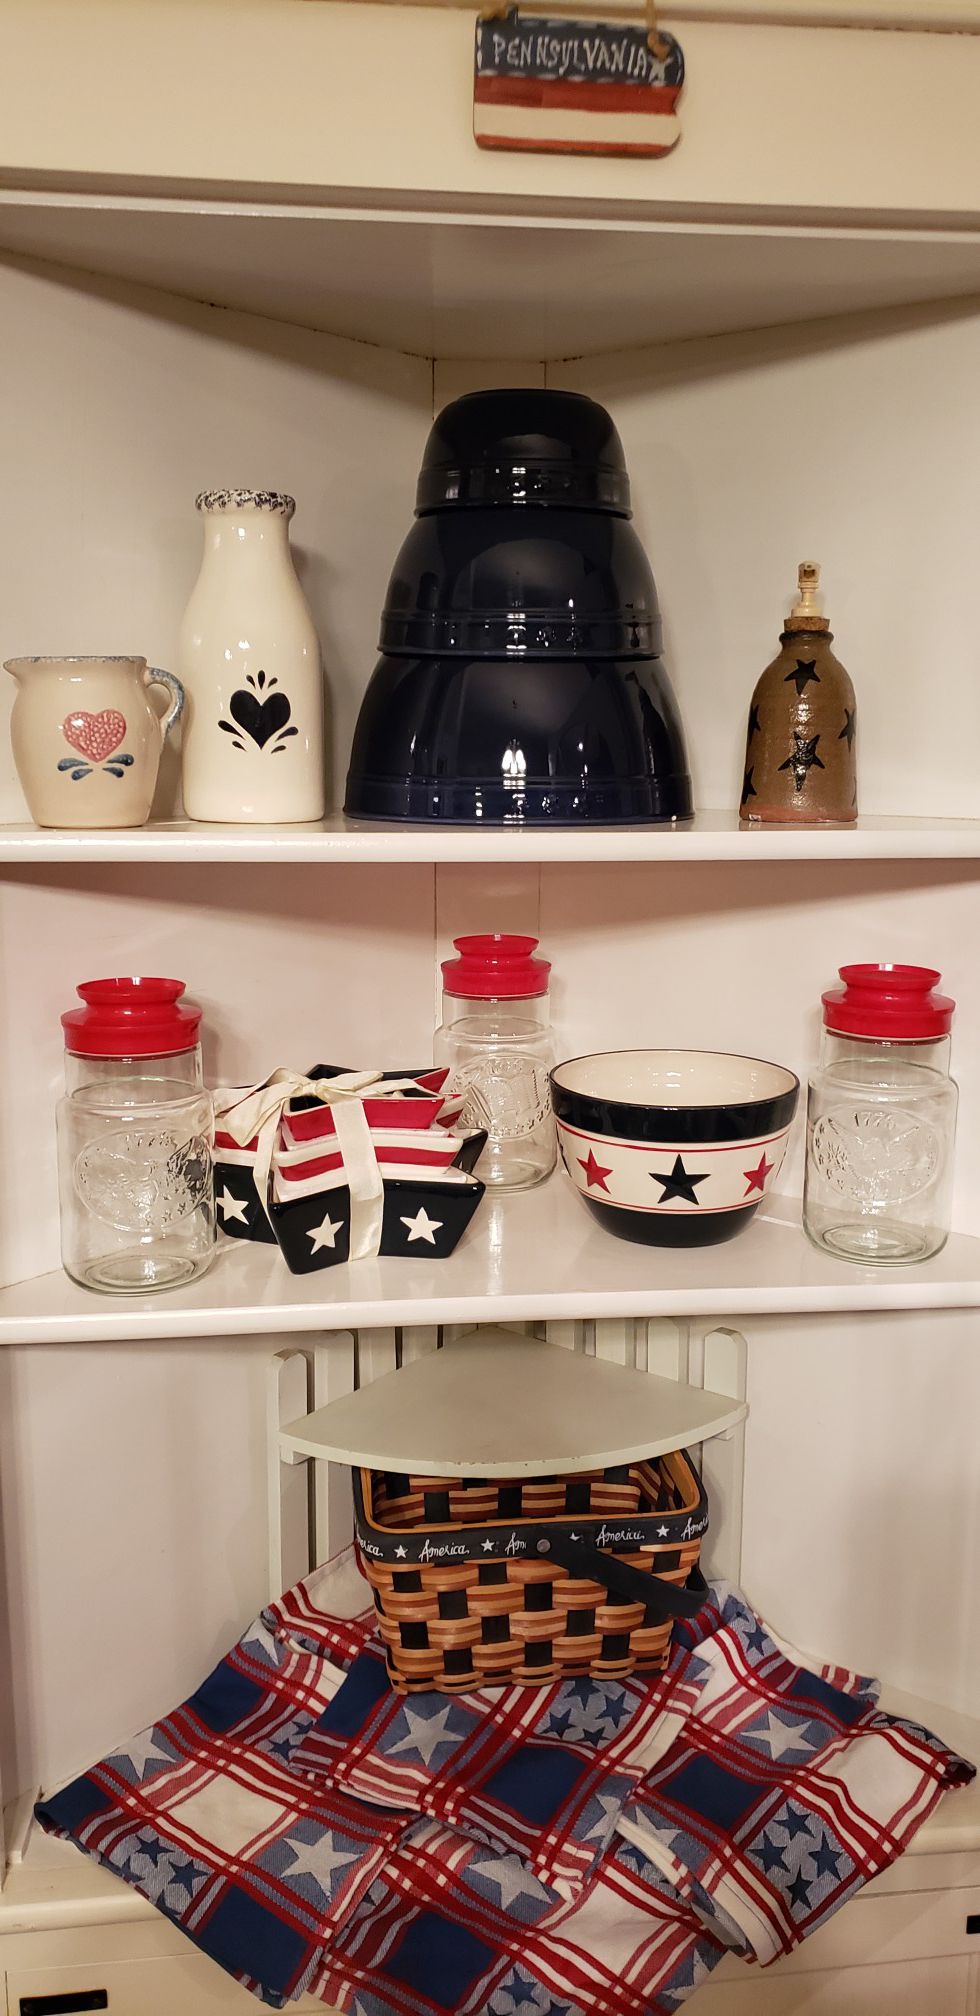 Americana/country decor and kitchen items